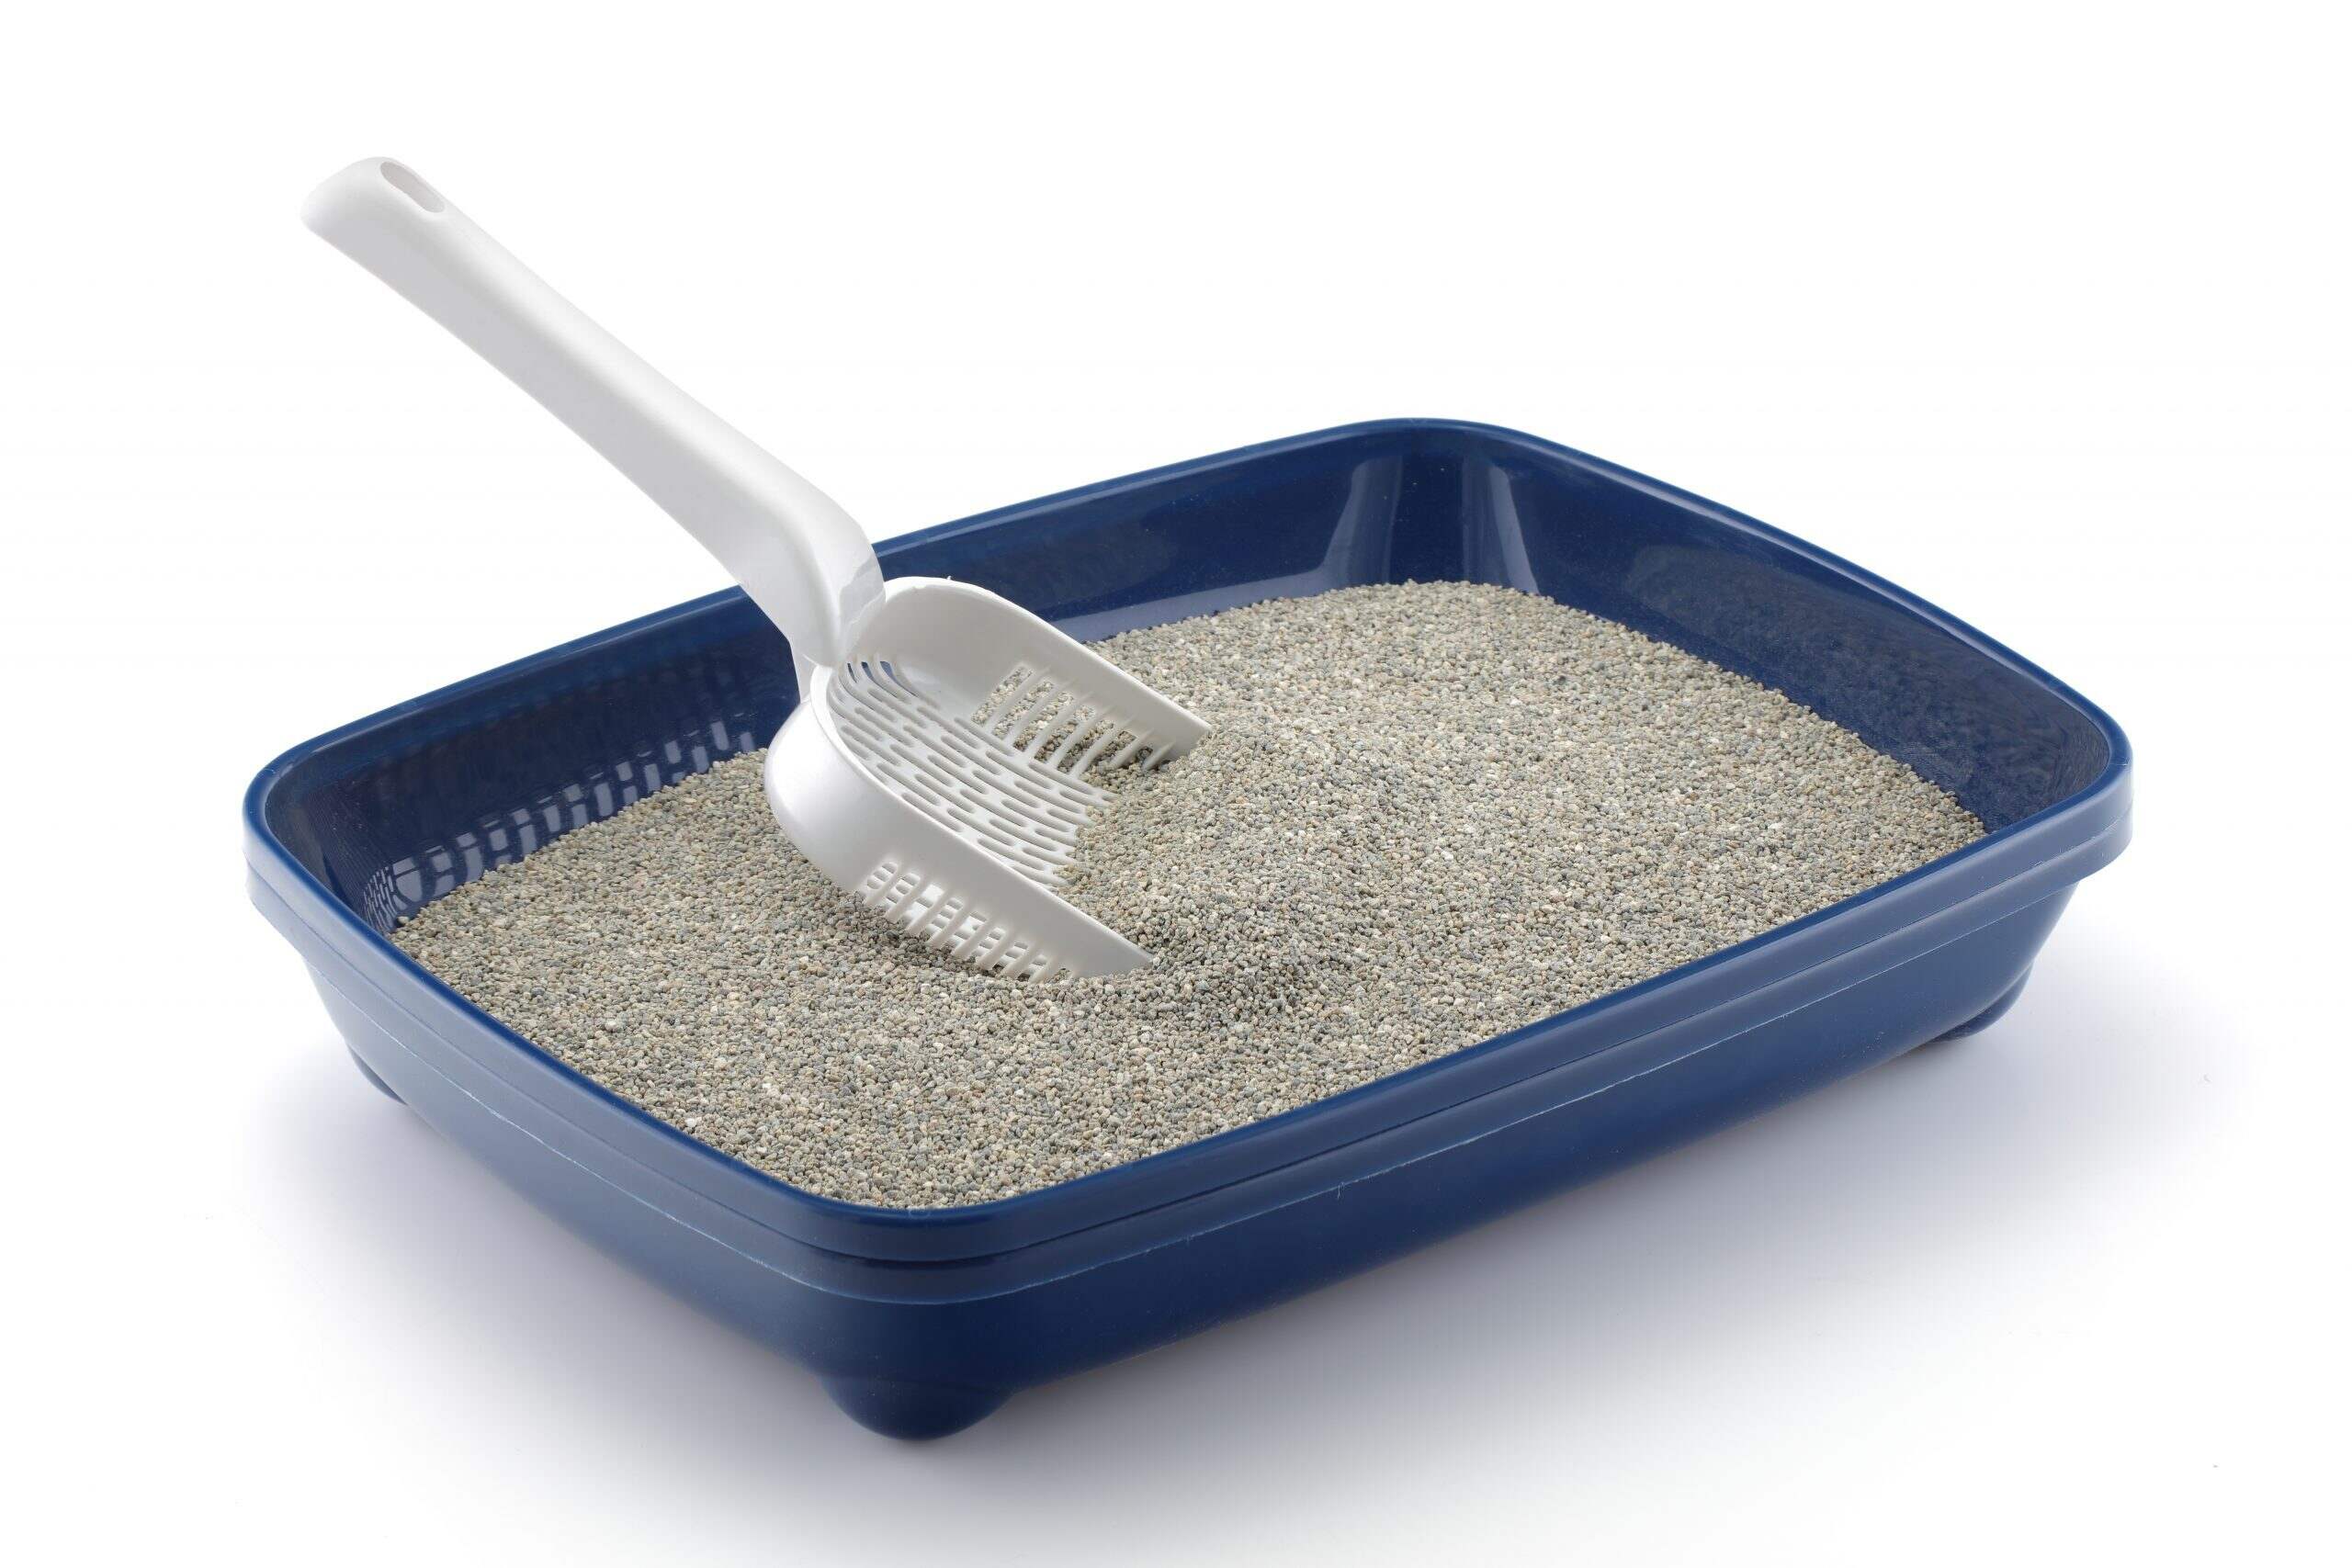 How To Clean A Kitty Litter Box